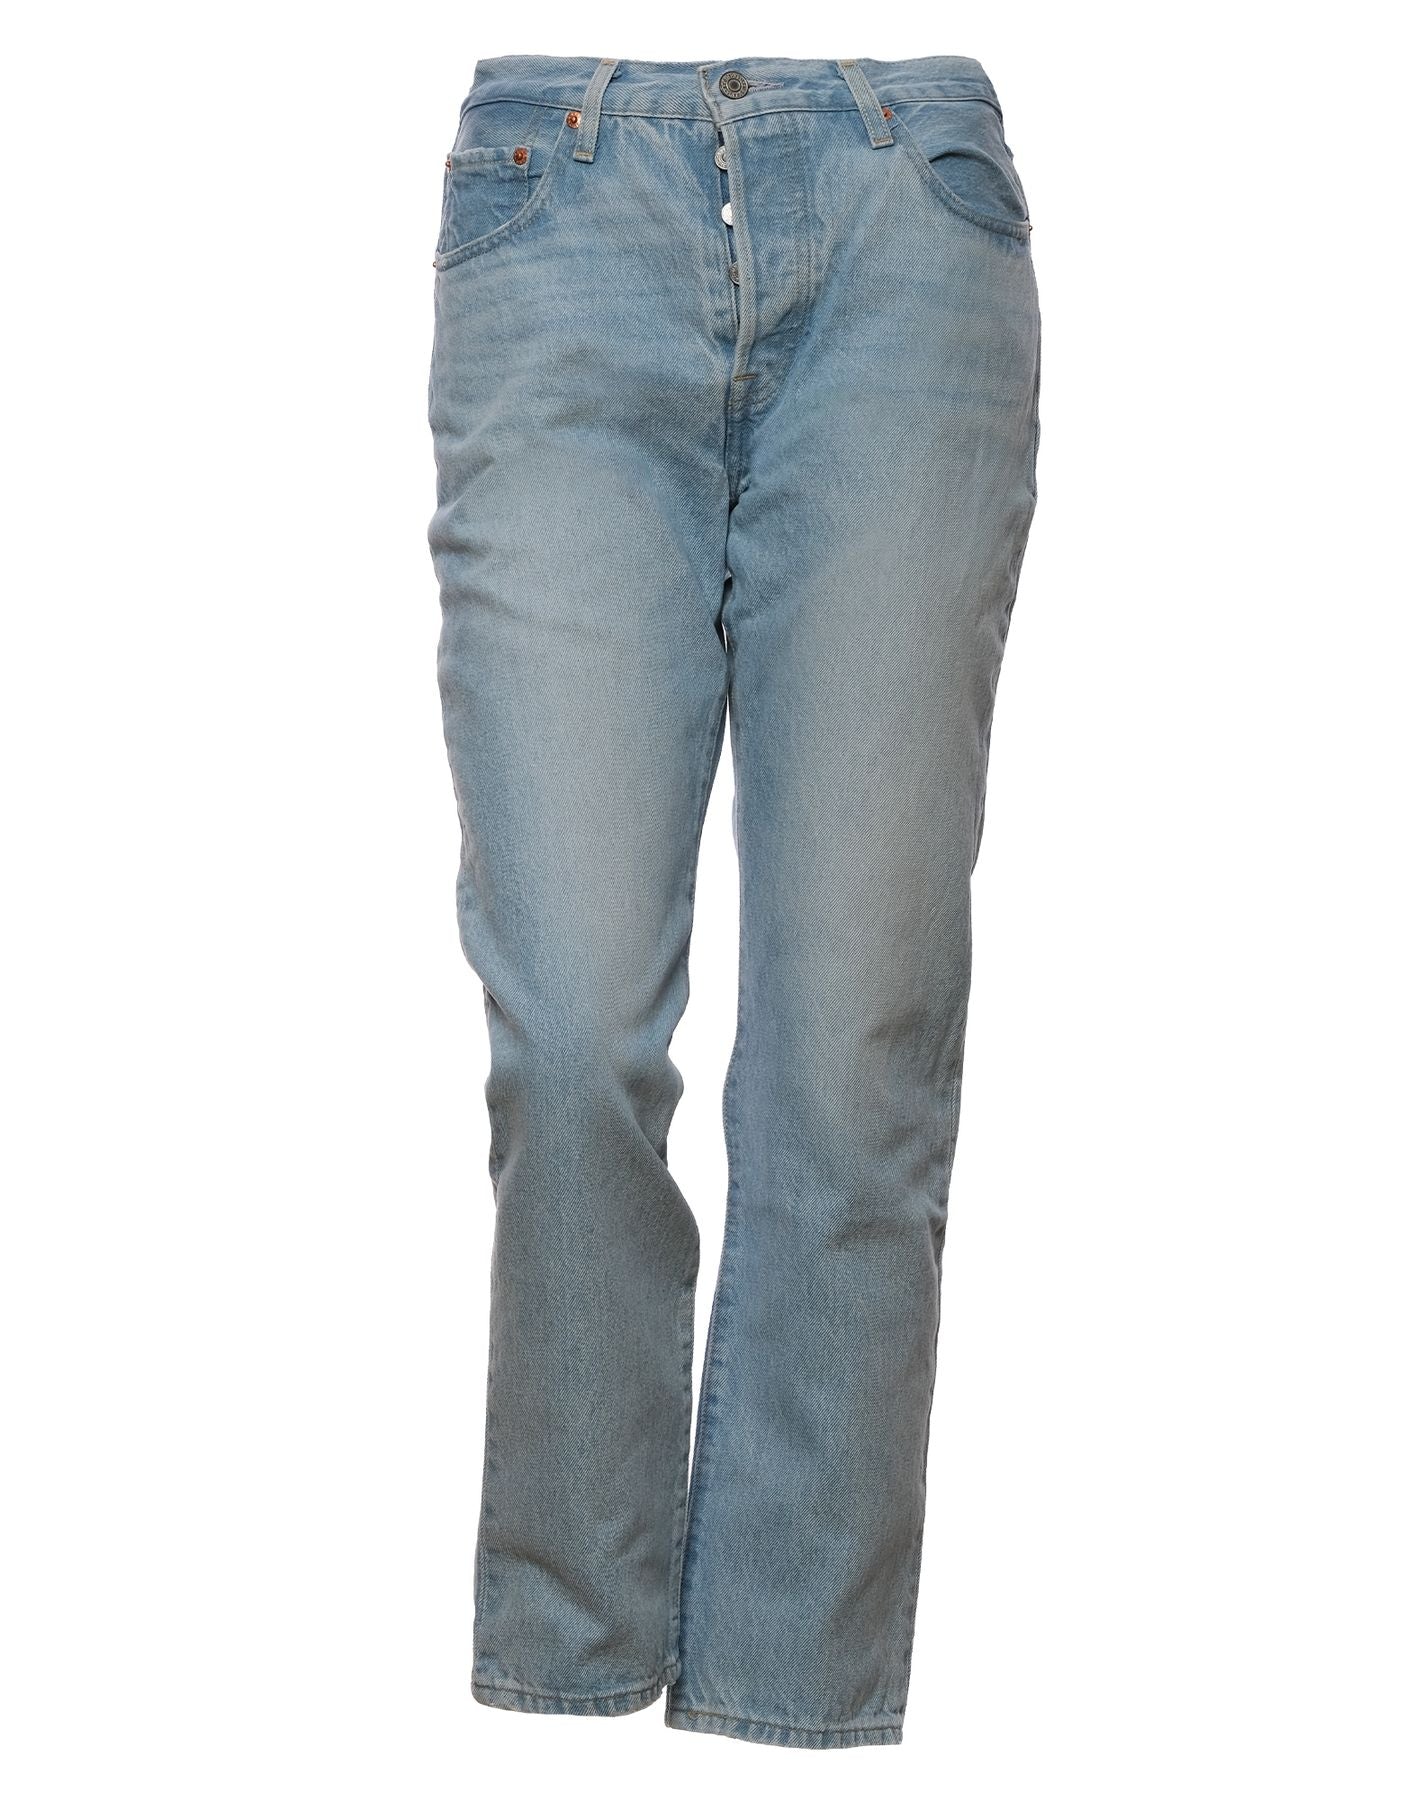 Jeans for woman 36200 0124 OJAI LUXOR Levi's